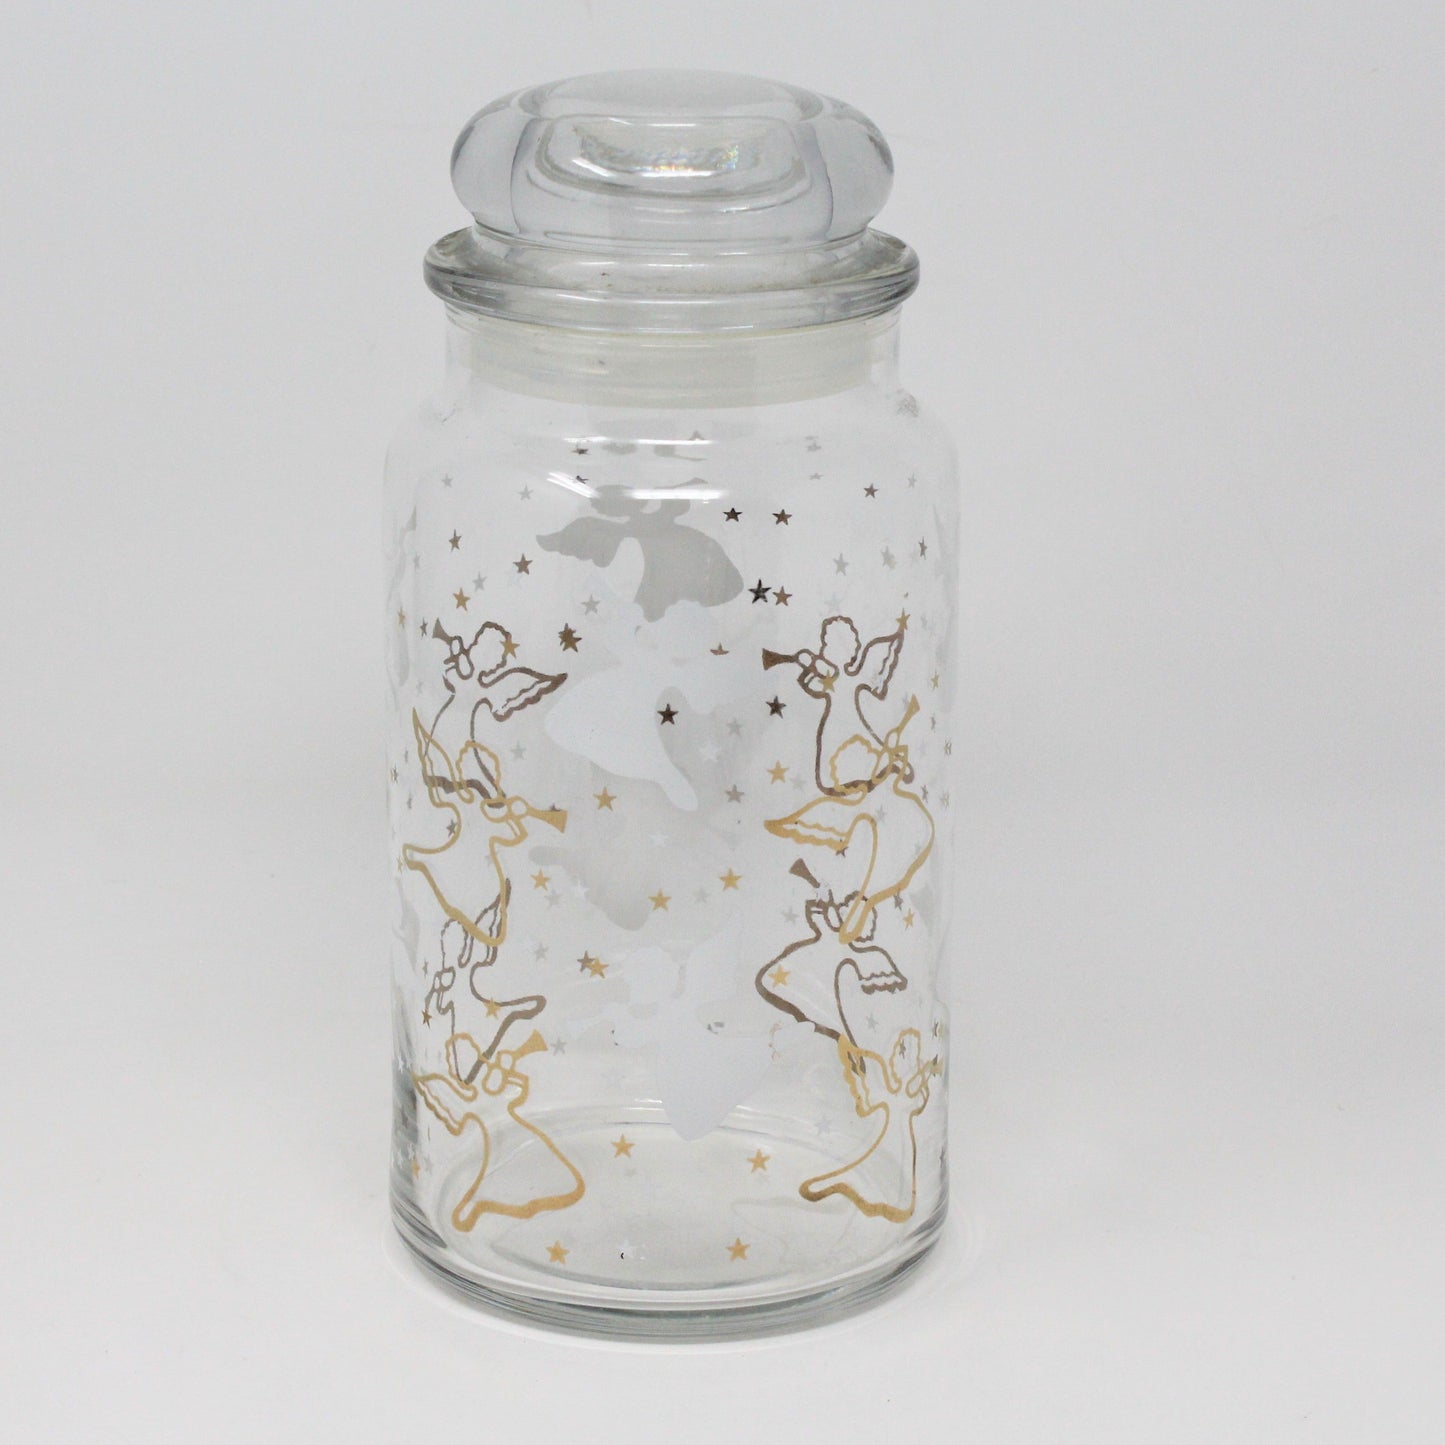 Canister, Anchor Hocking, Glass Apothecary Jar w/Lid, Herald Angels Gold & White, Vintage